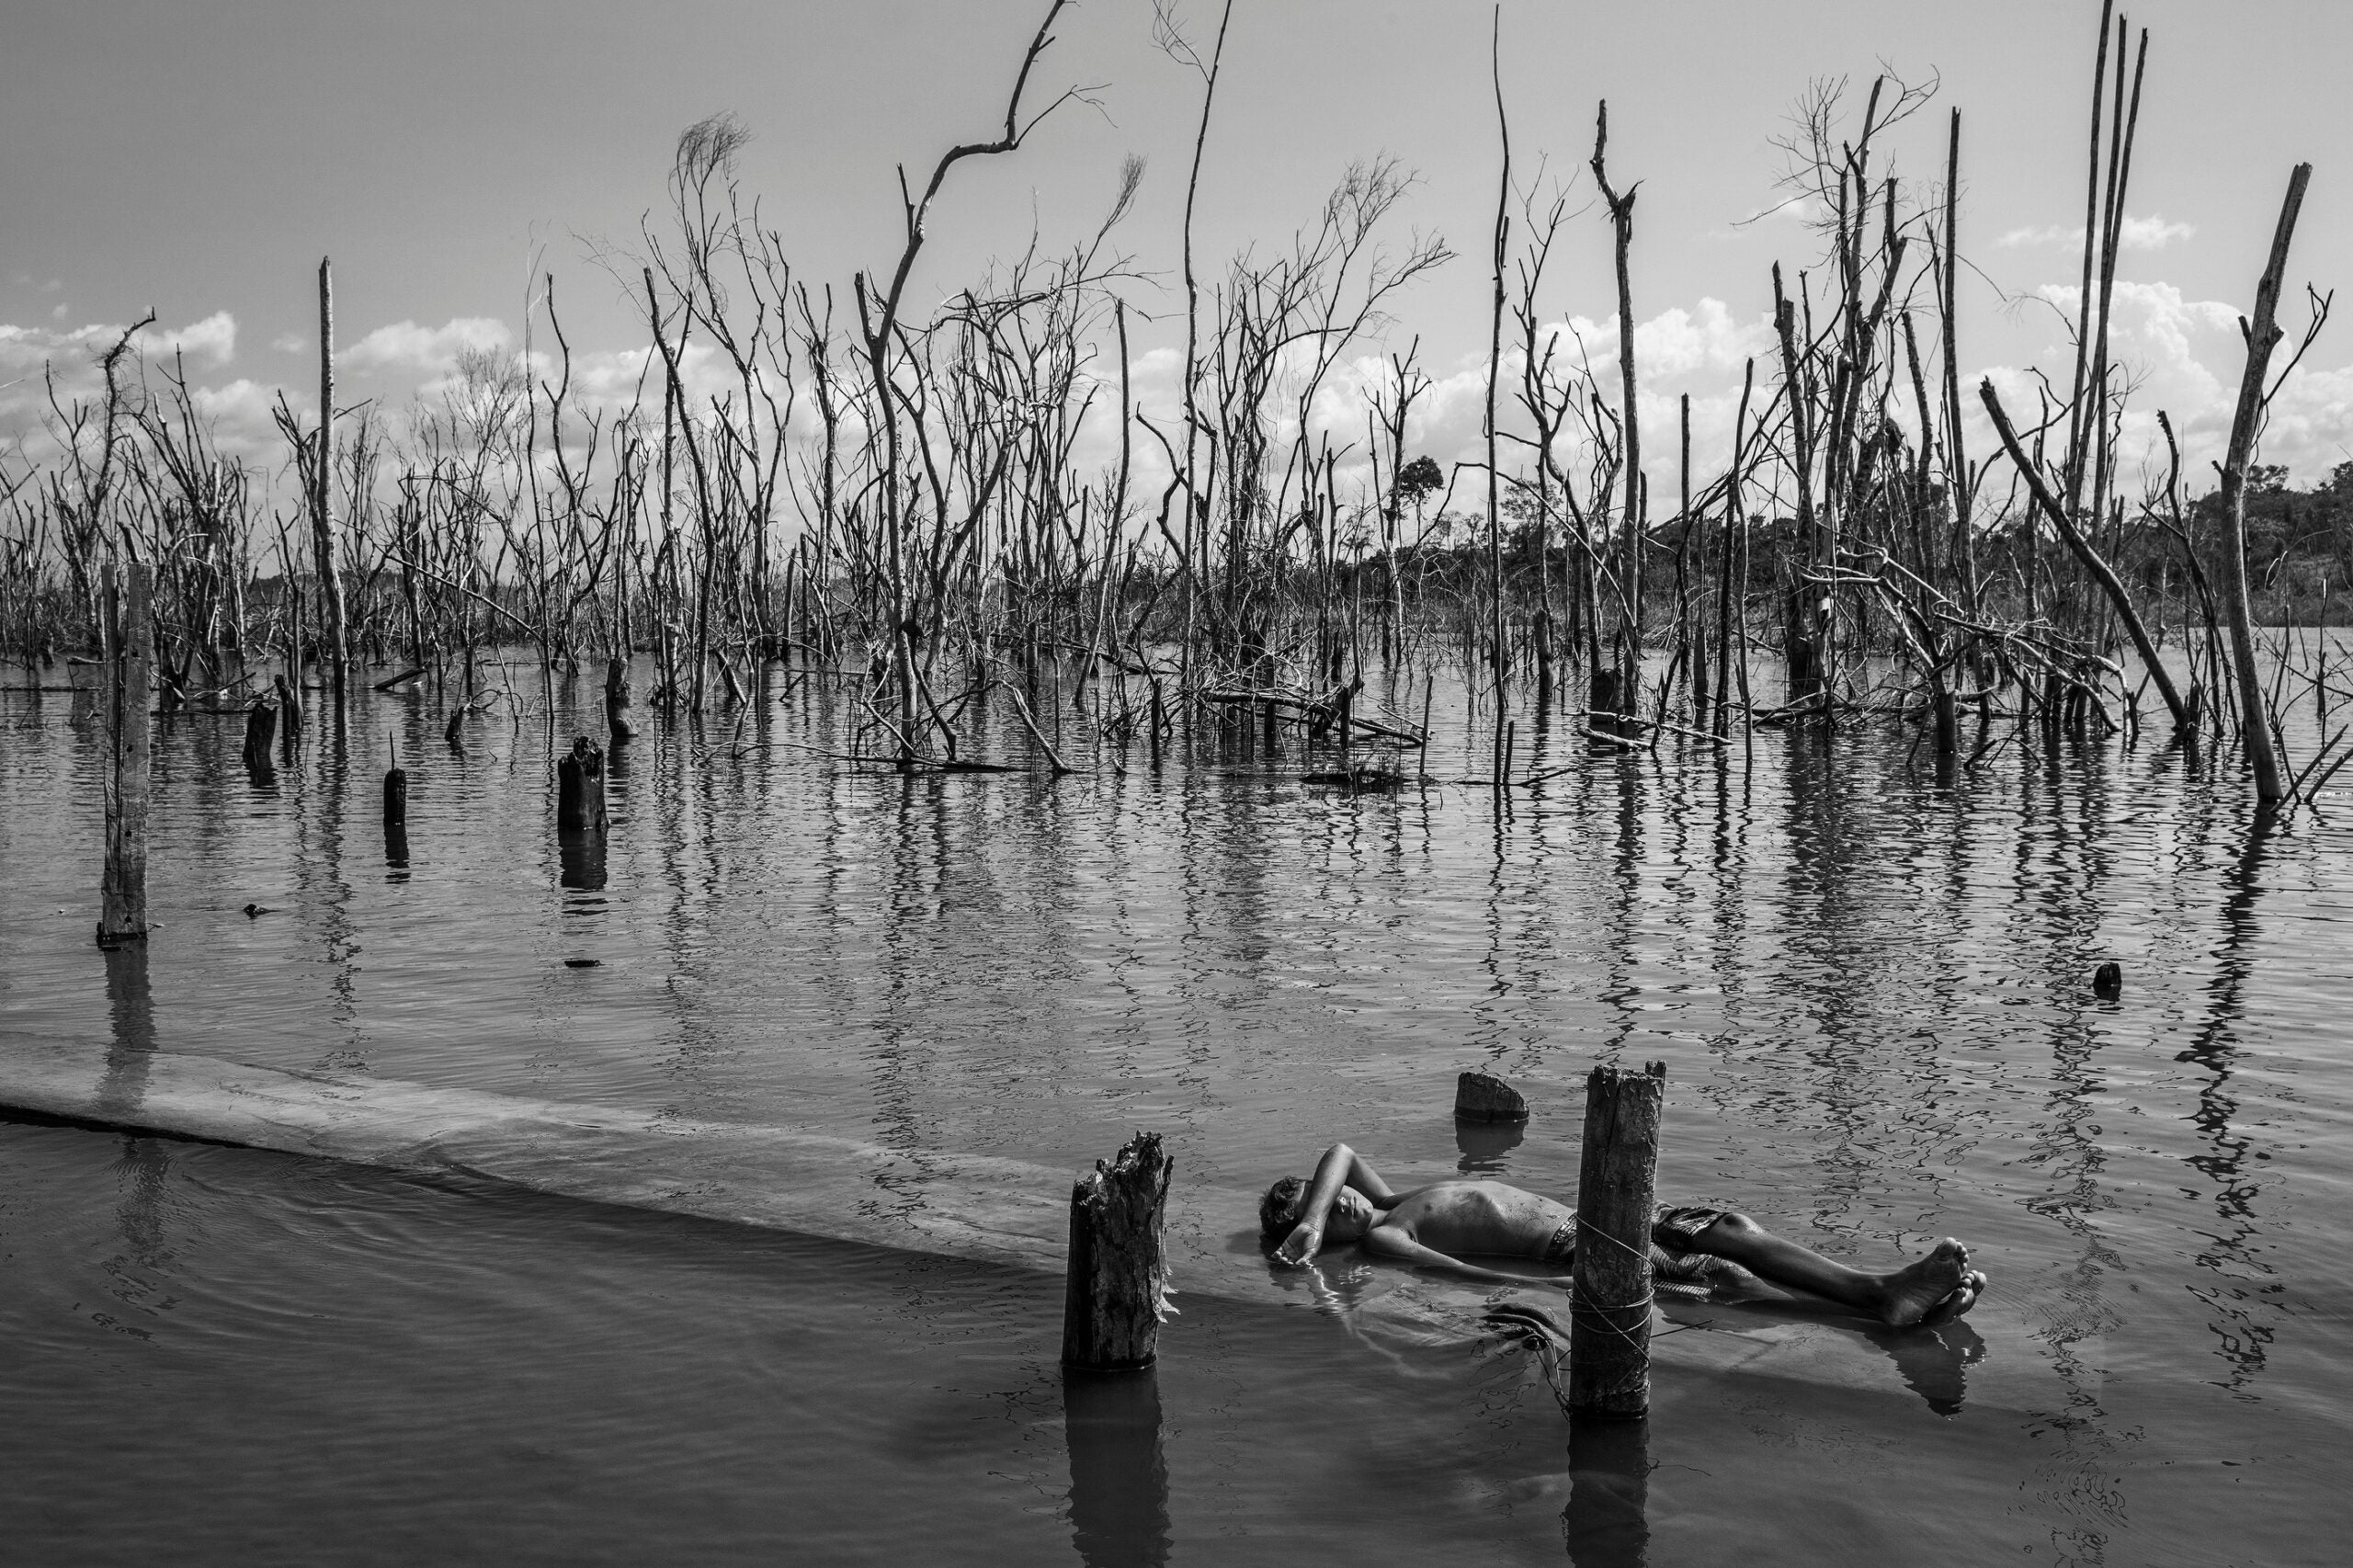 A boy rests on a dead tree trunk in the Xingu River in Paratizão, a community located near the Belo Monte hydroelectric dam, Pará, Brazil, on 28 August 2018. He is surrounded by patches of dead trees, formed after the flooding of the reservoir.